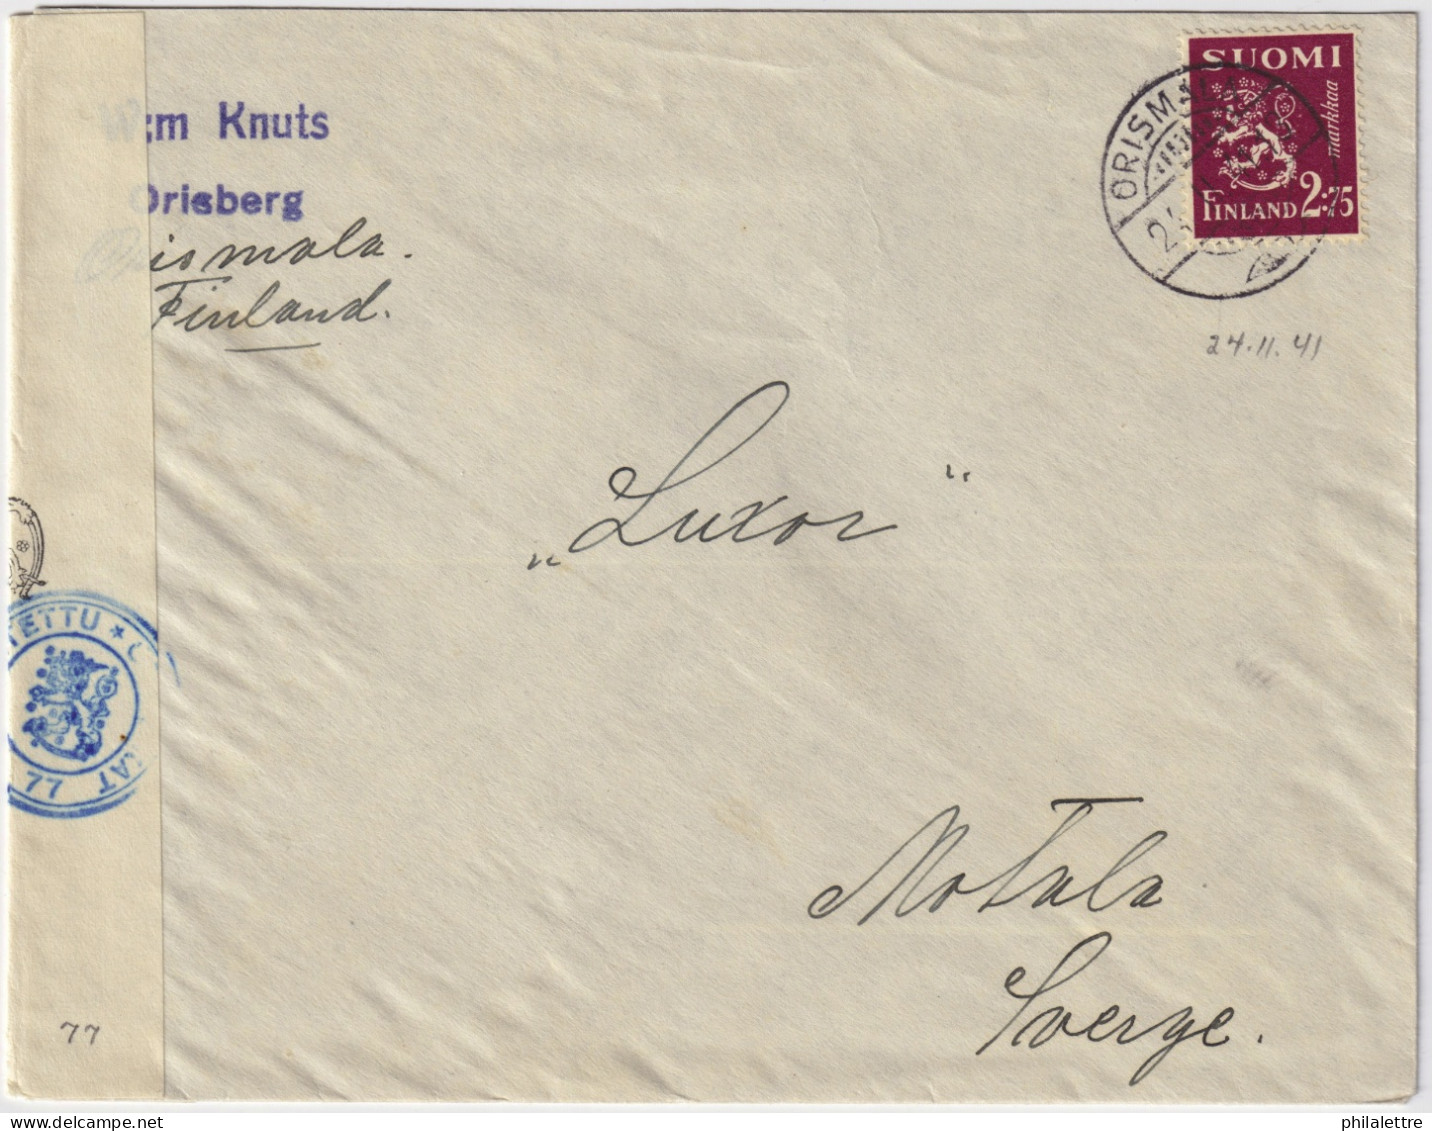 FINLAND - 1941 - Censored Cover From ORISMALA To Motala, Sweden Franked 2.75Mk - Lettres & Documents